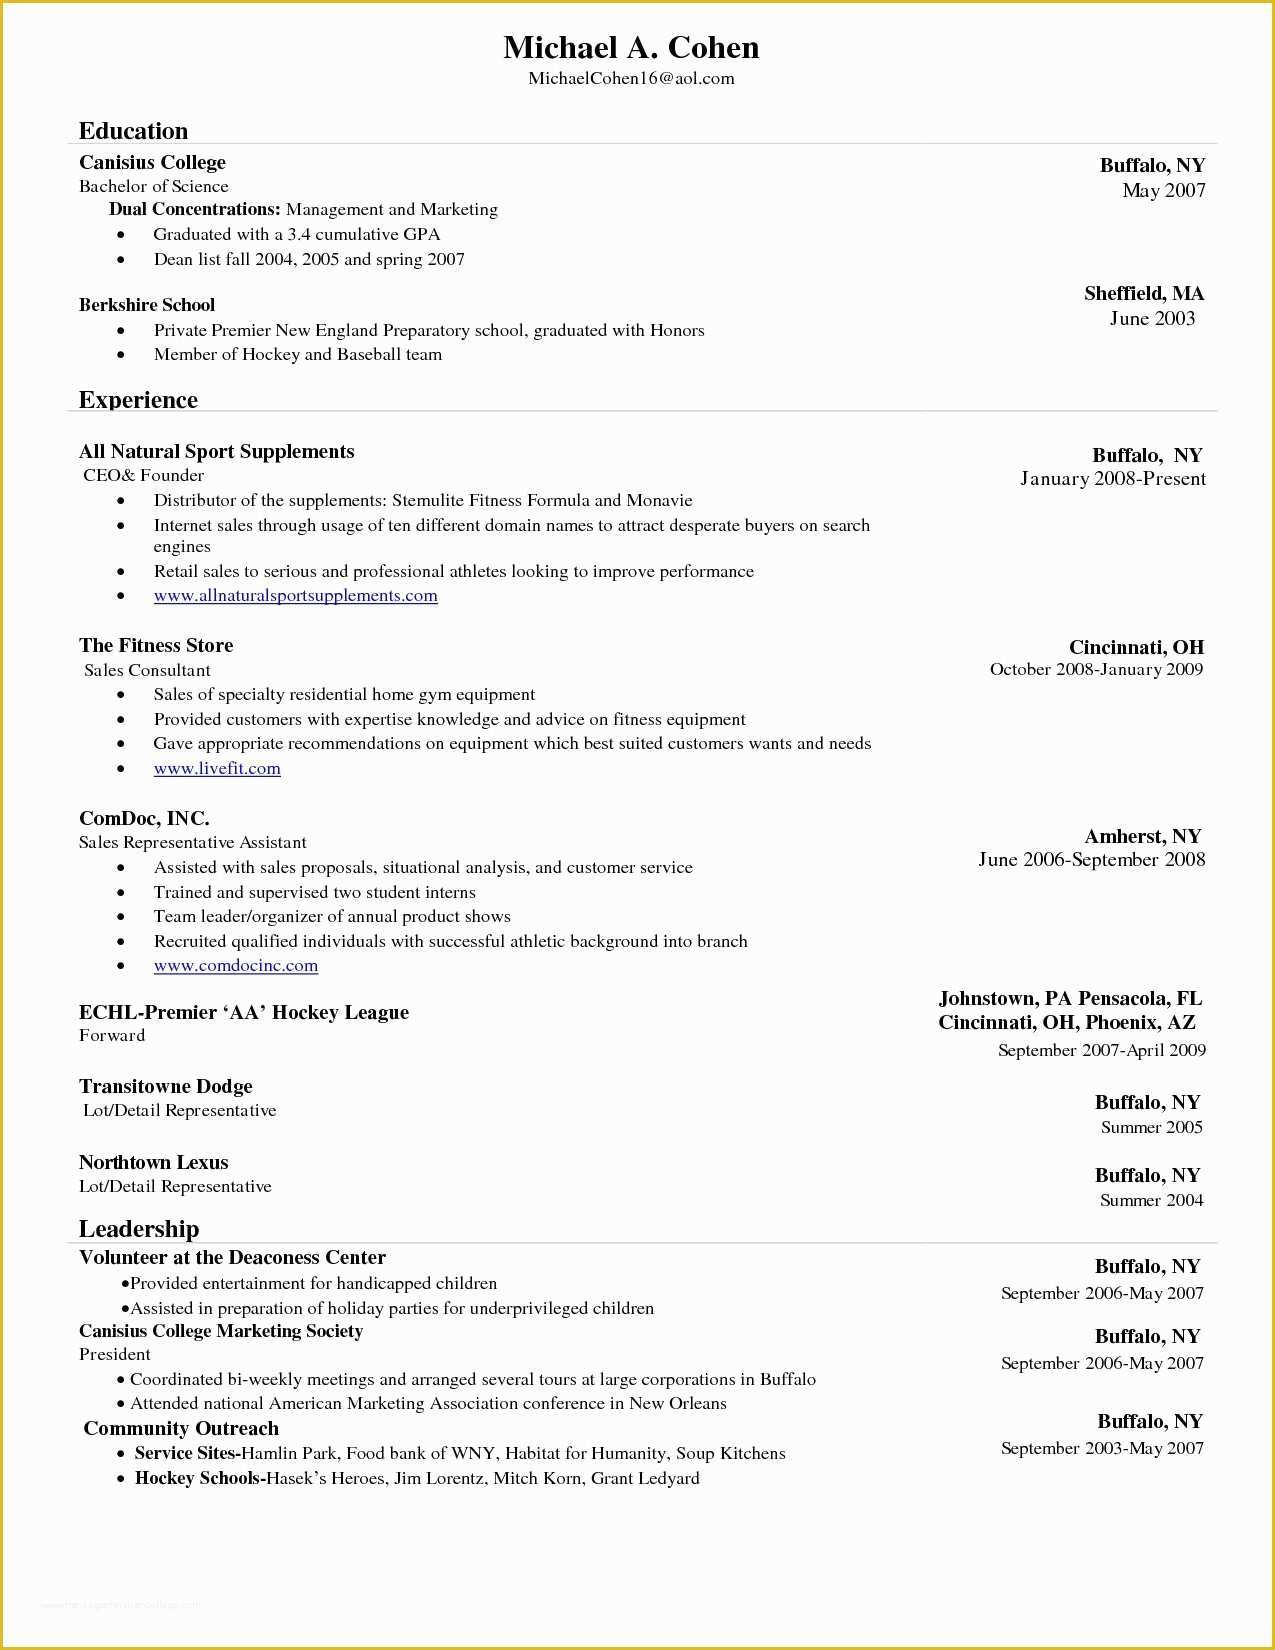 Creative Resume Templates Free Download for Microsoft Word Of 41 Last Creative Resume Templates Free Download for